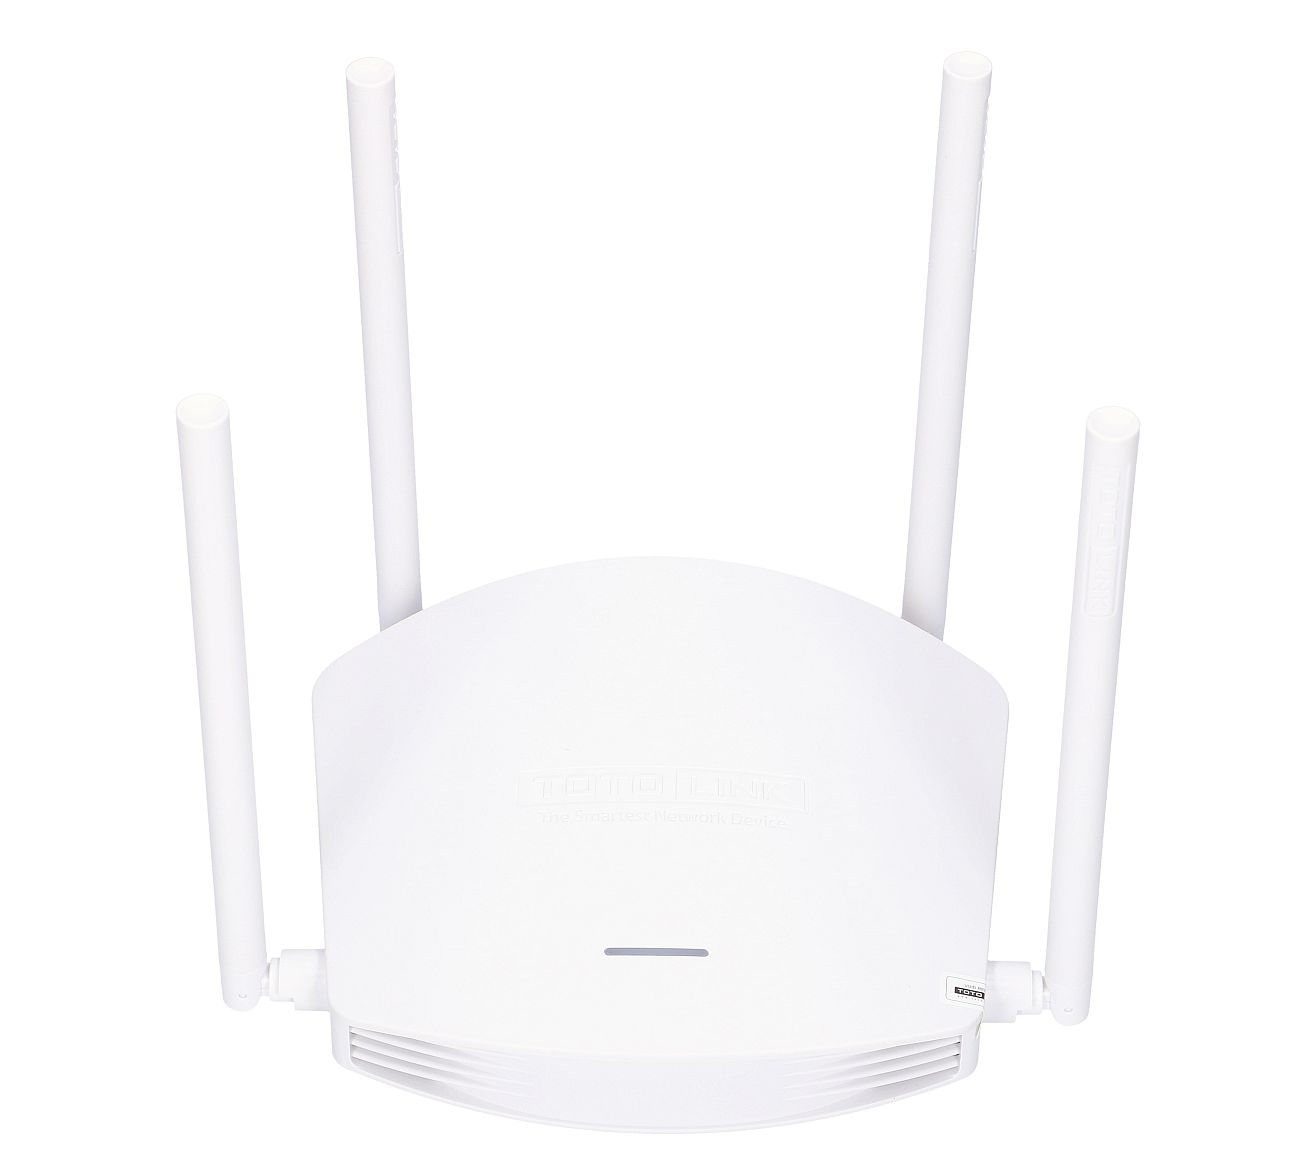 Totolink N600R WiFi Router 600Mb/s, 2,4GHz, MIMO, 5x RJ45 100Mb/s, 4x 5dBi